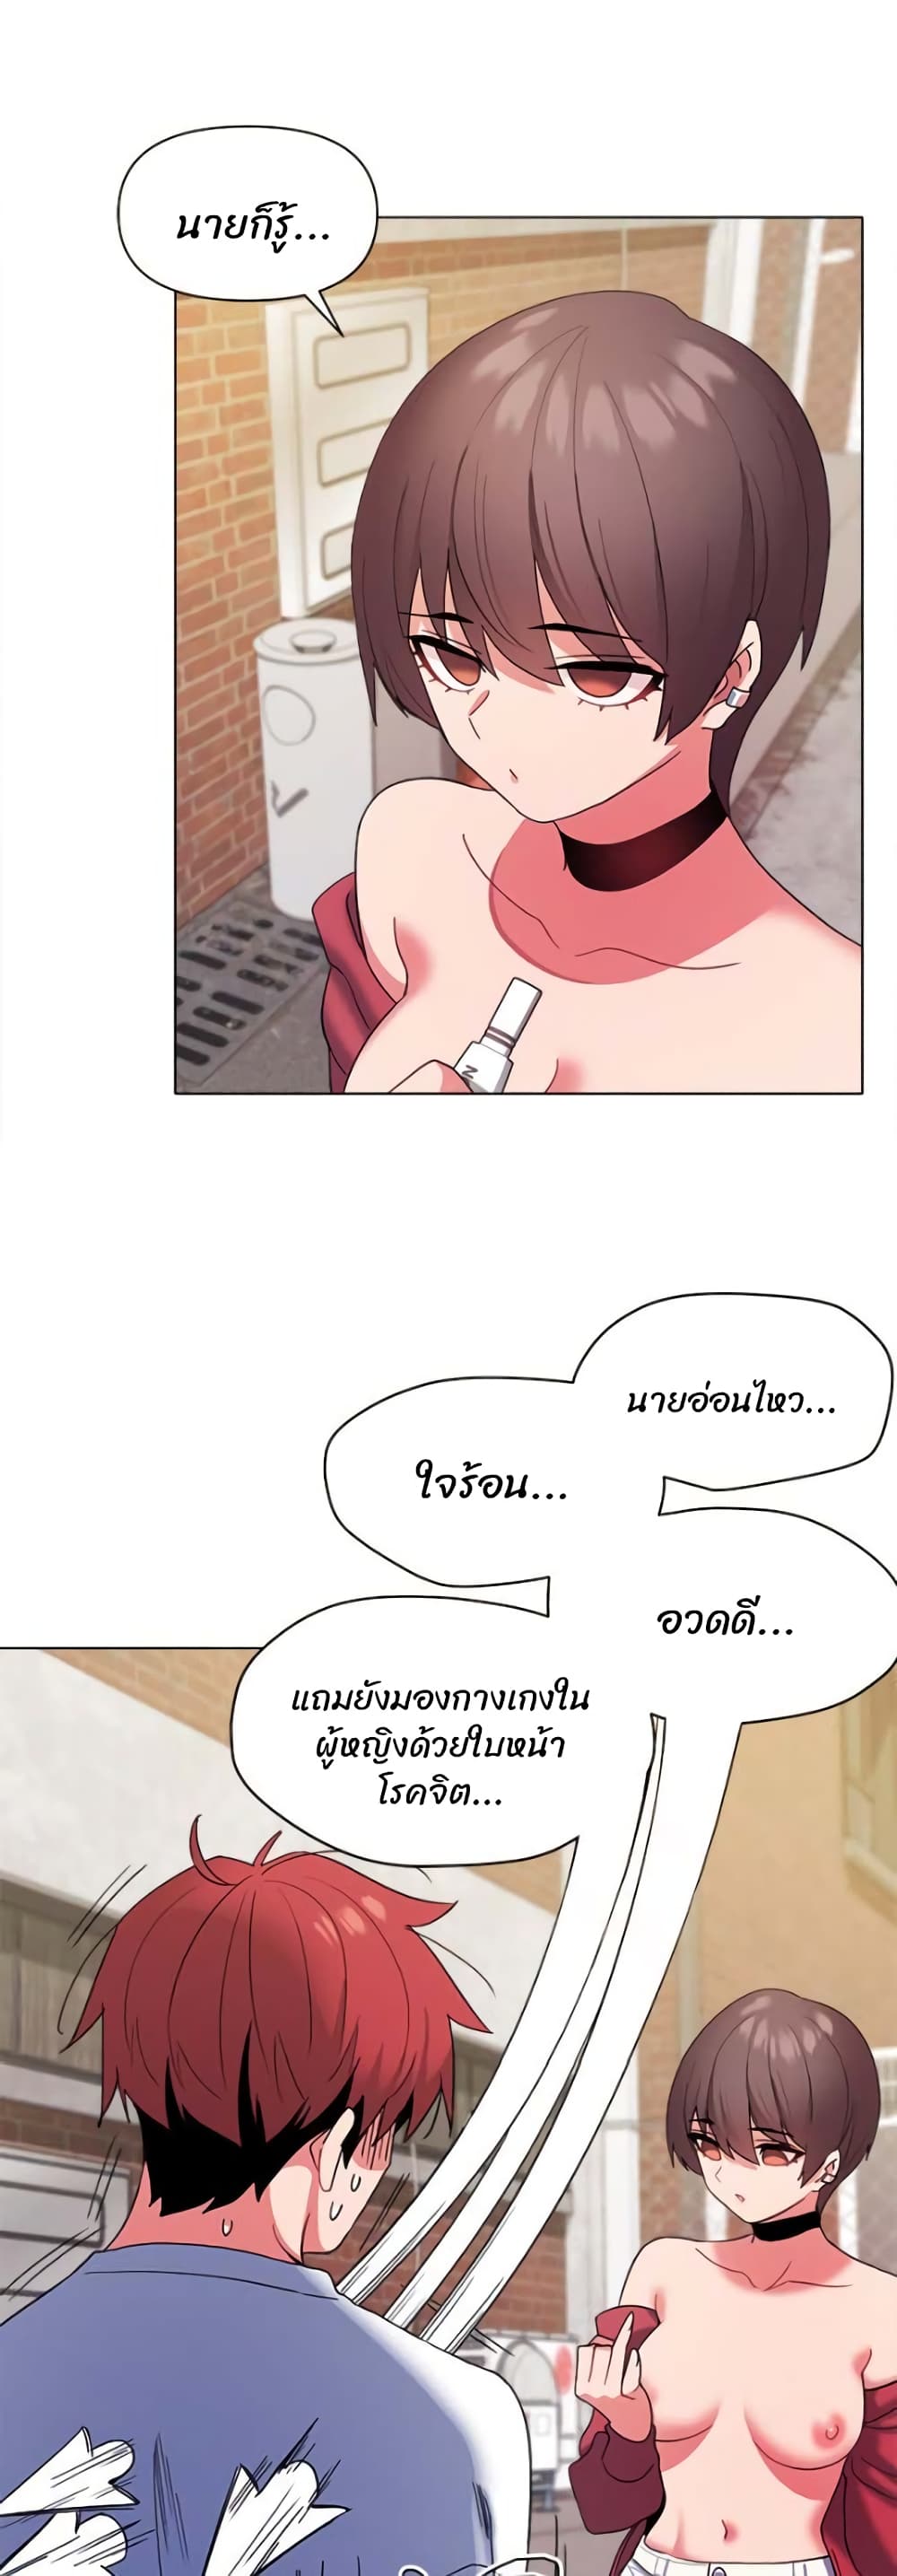 College Life Starts With Clubs 27 ภาพที่ 6